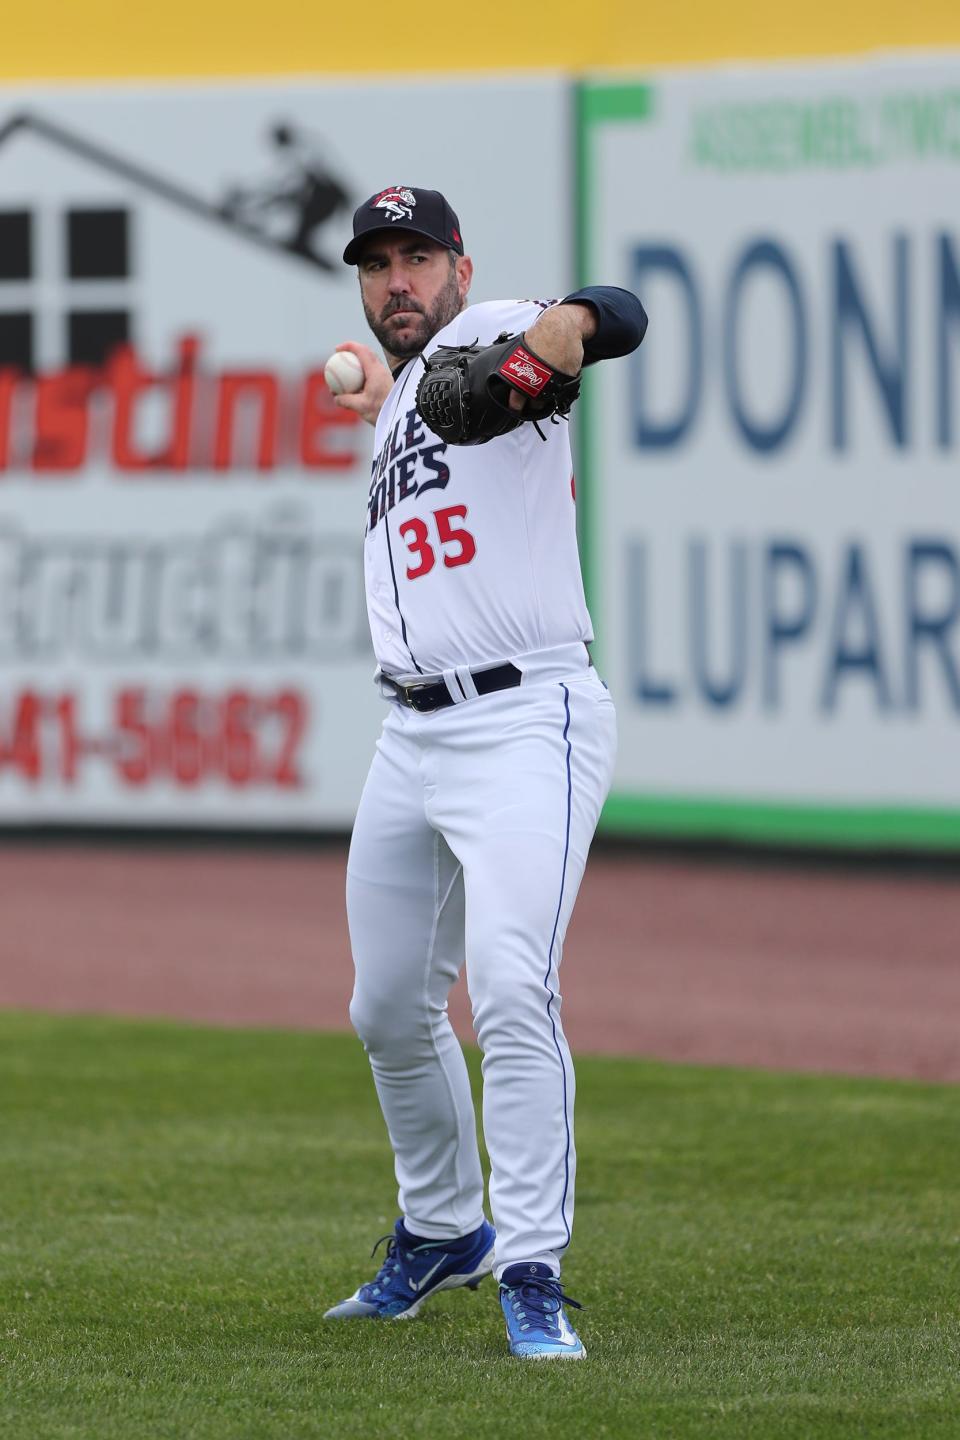 Justin Verlander made a rehab appearance with the Double-A Binghamton Rumble Ponies on Friday, April 28, 2023 at Mirabito Stadium. Verlander has yet to make a regular-season appearance with the New York Mets.